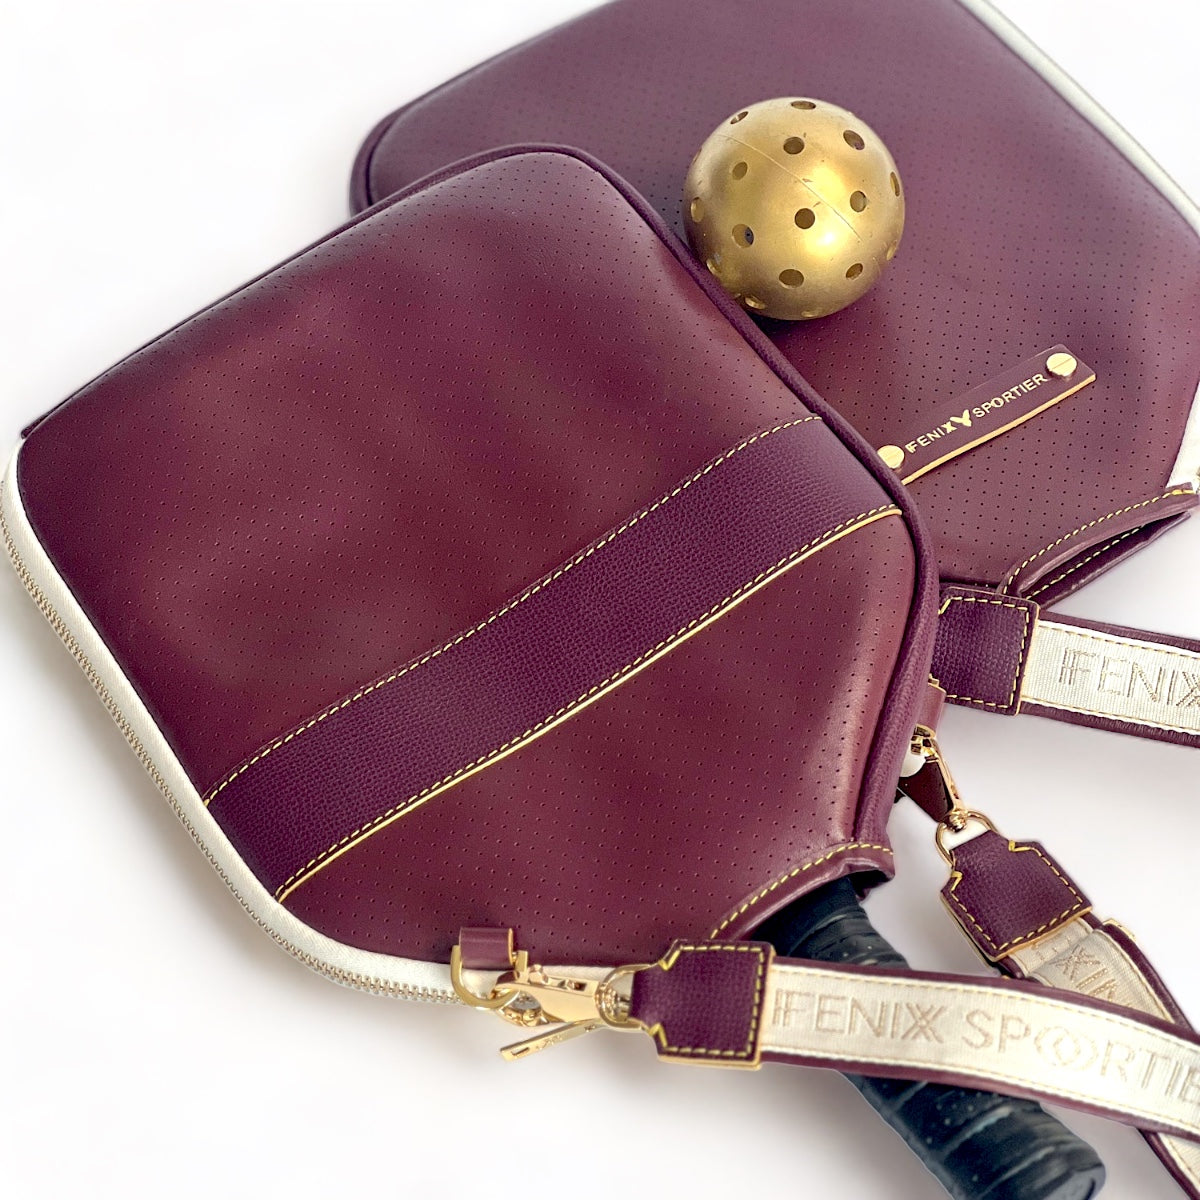 "The Addict" Leather Pickleball Bag - Cardinal w/Gold